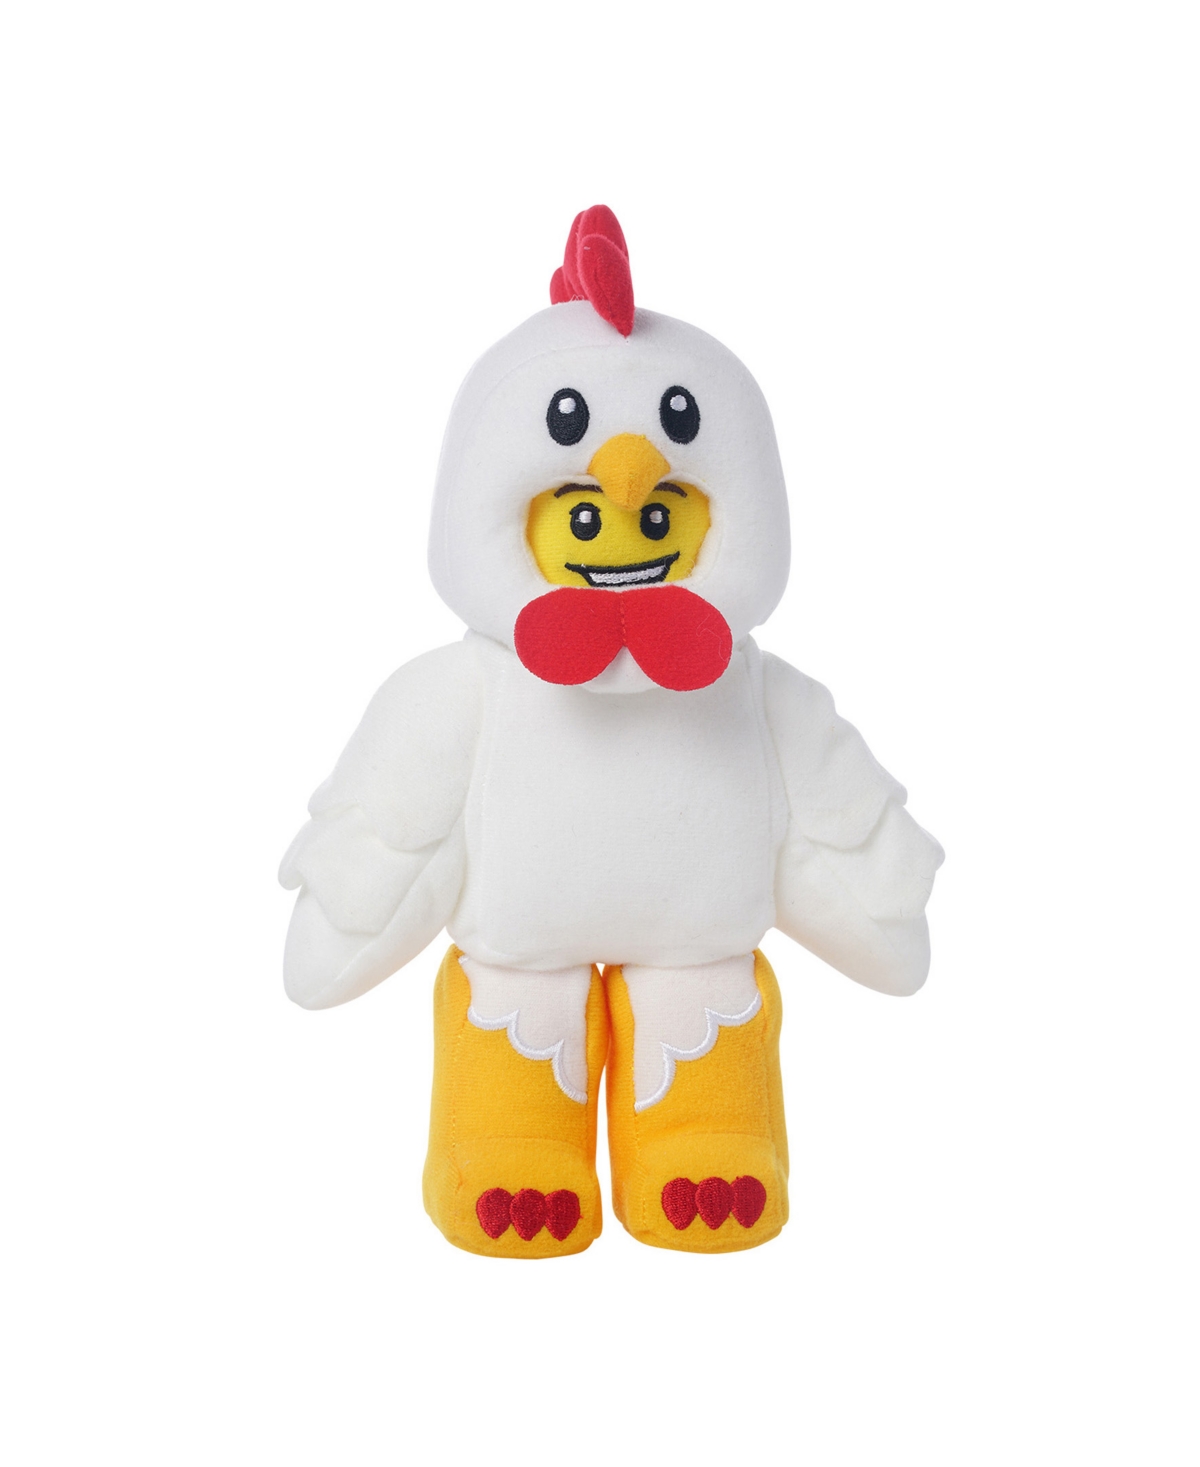 Manhattan Toy Company Lego Minifigure Chicken Suit Guy 9" Plush Character In Multicolor